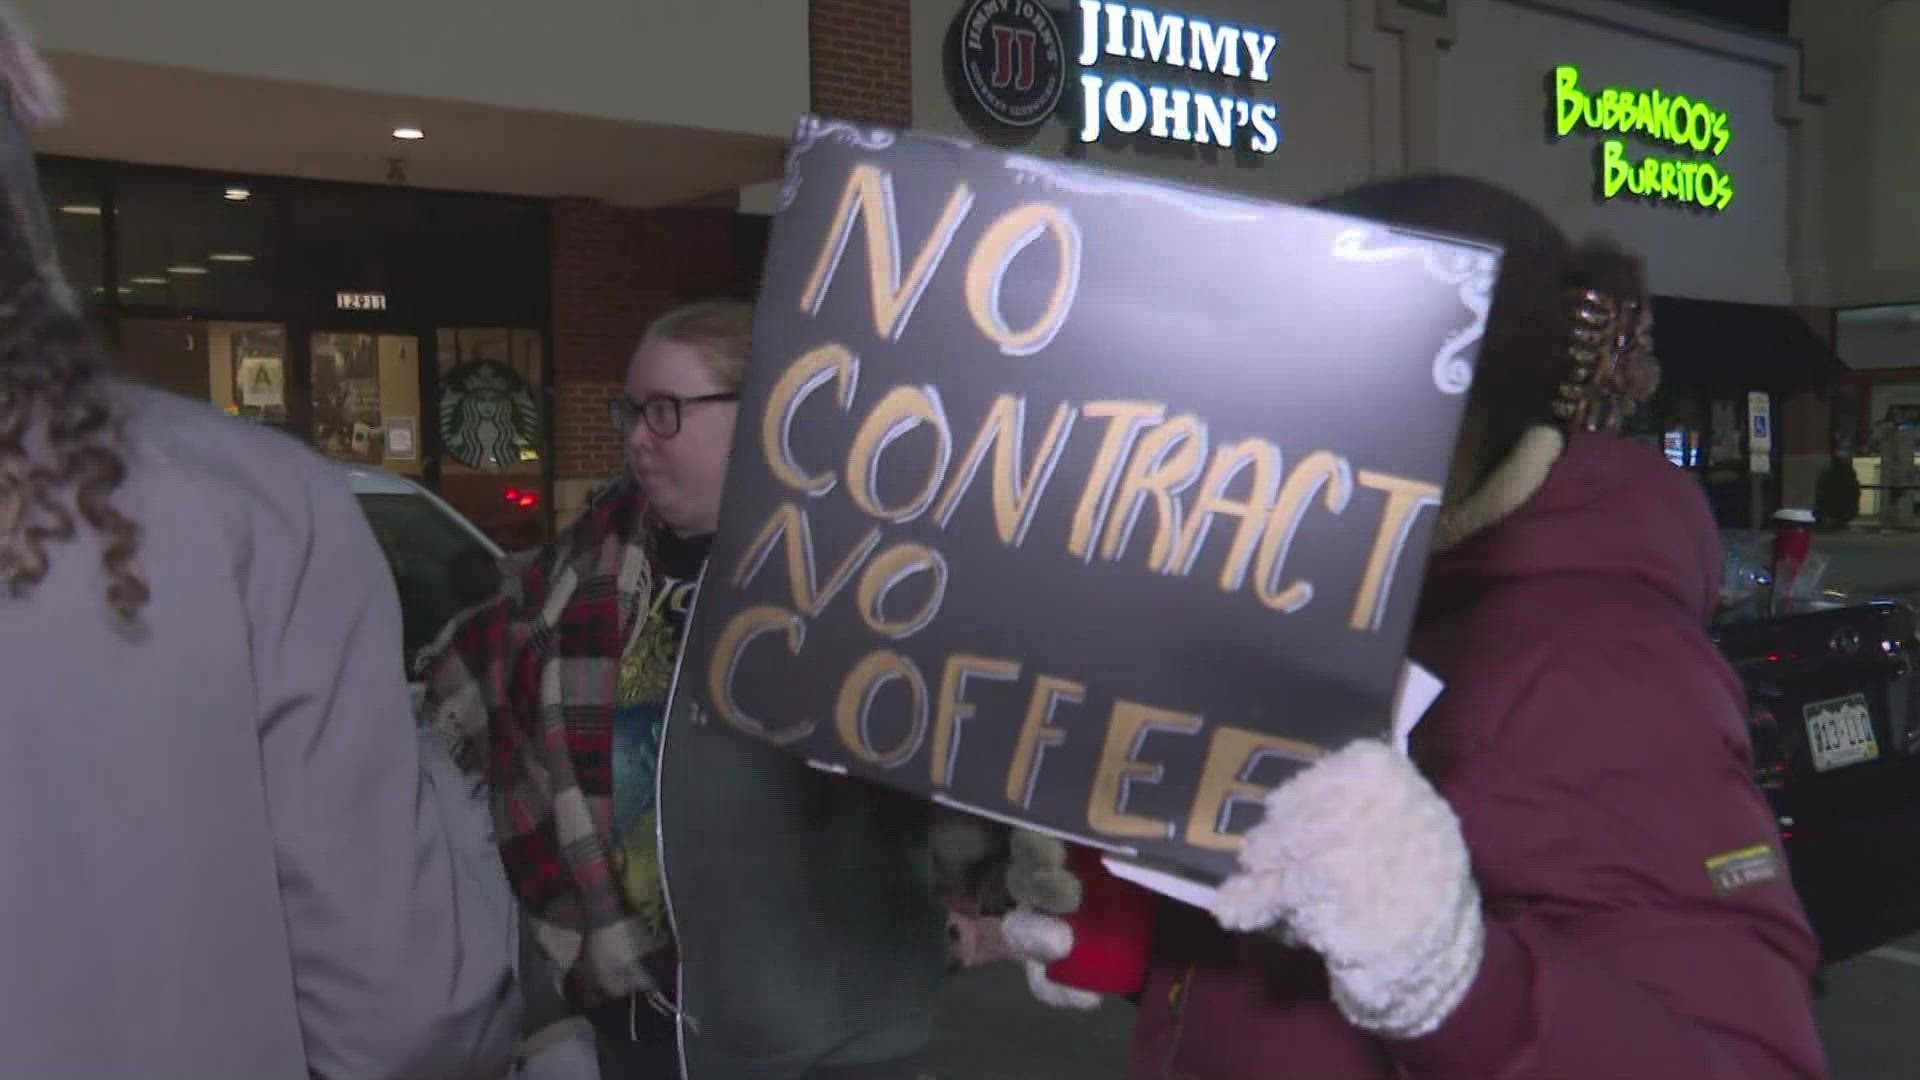 Baristas at dozens of locations across the U.S. have instead gone on strike, commencing what they're calling the "Red Cup Rebellion".